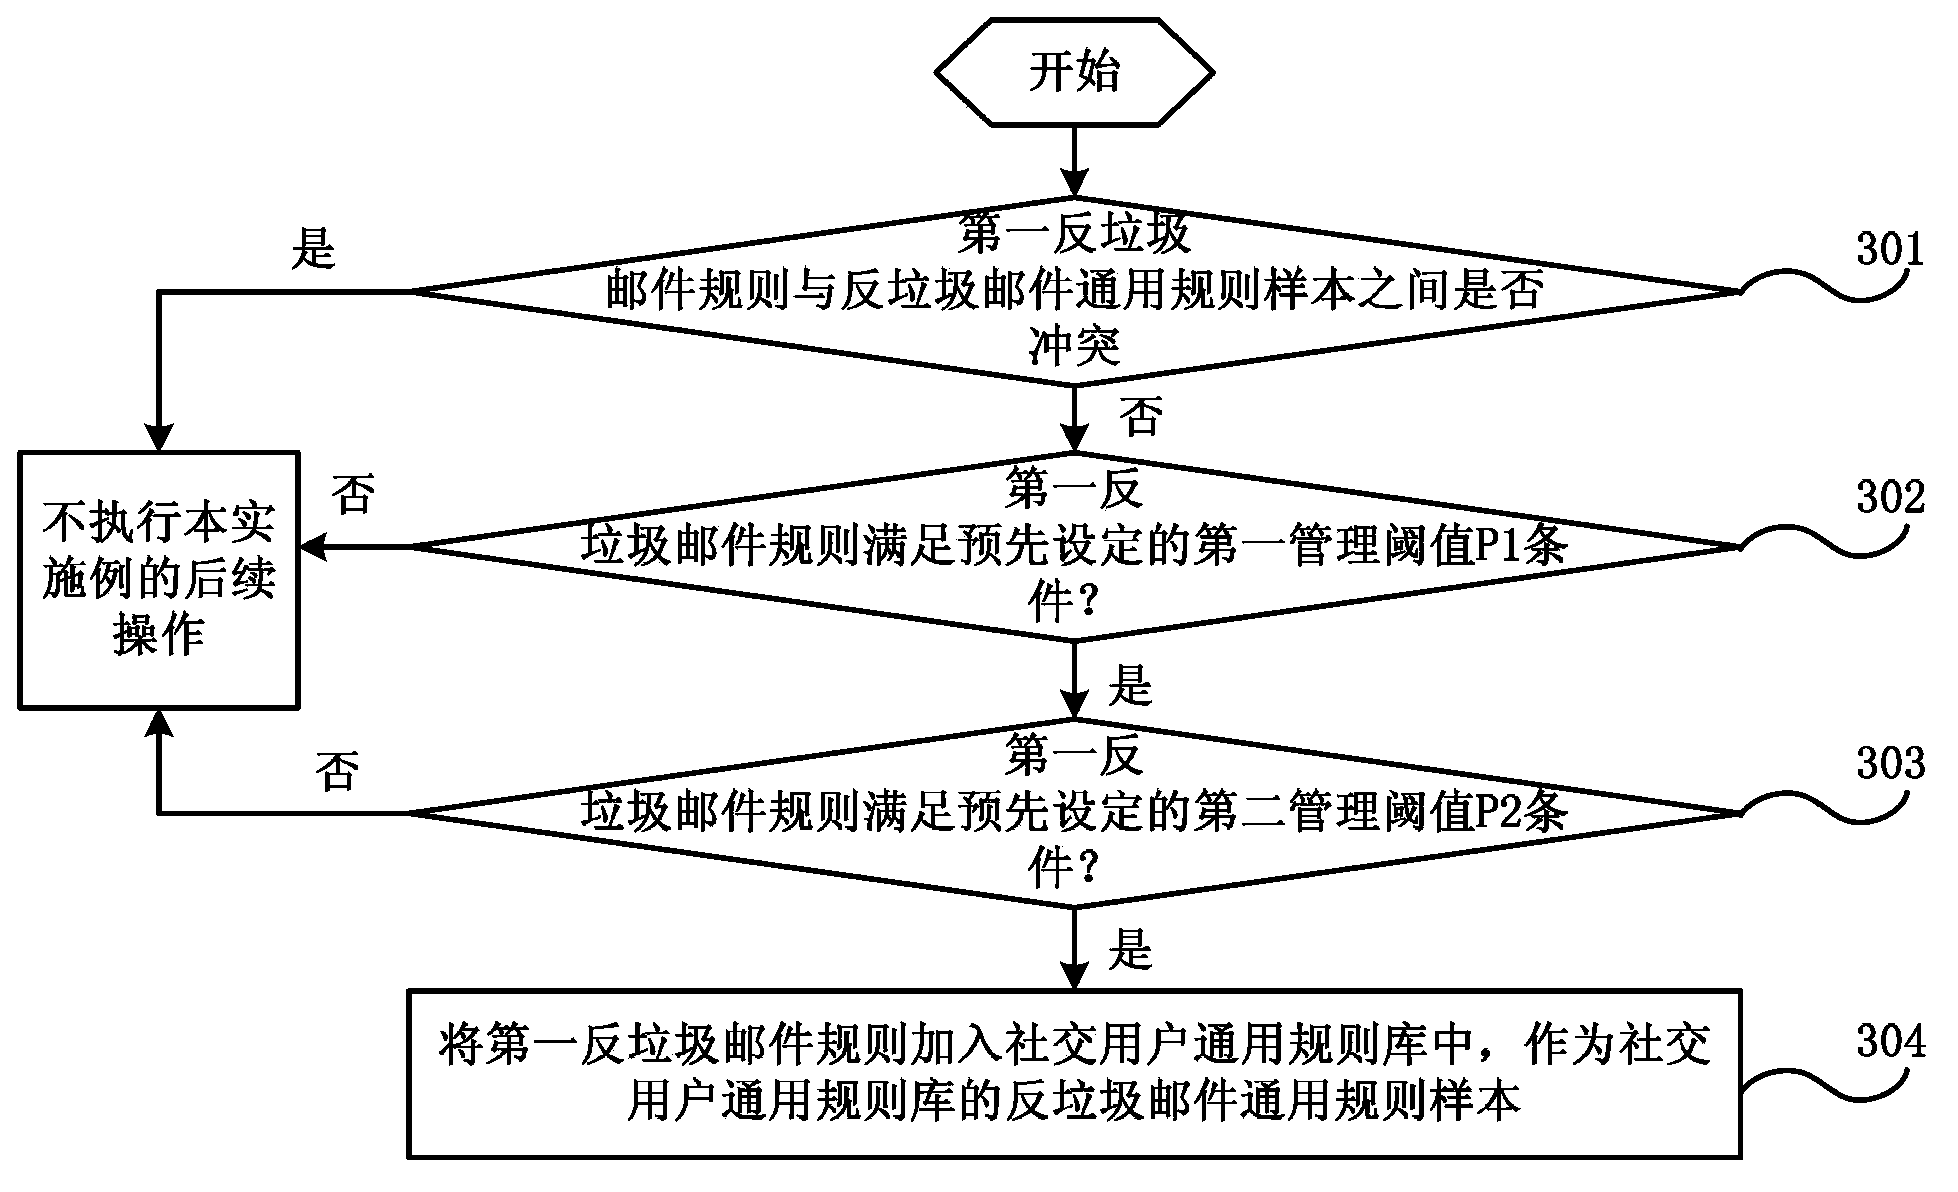 Spam mail filtering processing method and system